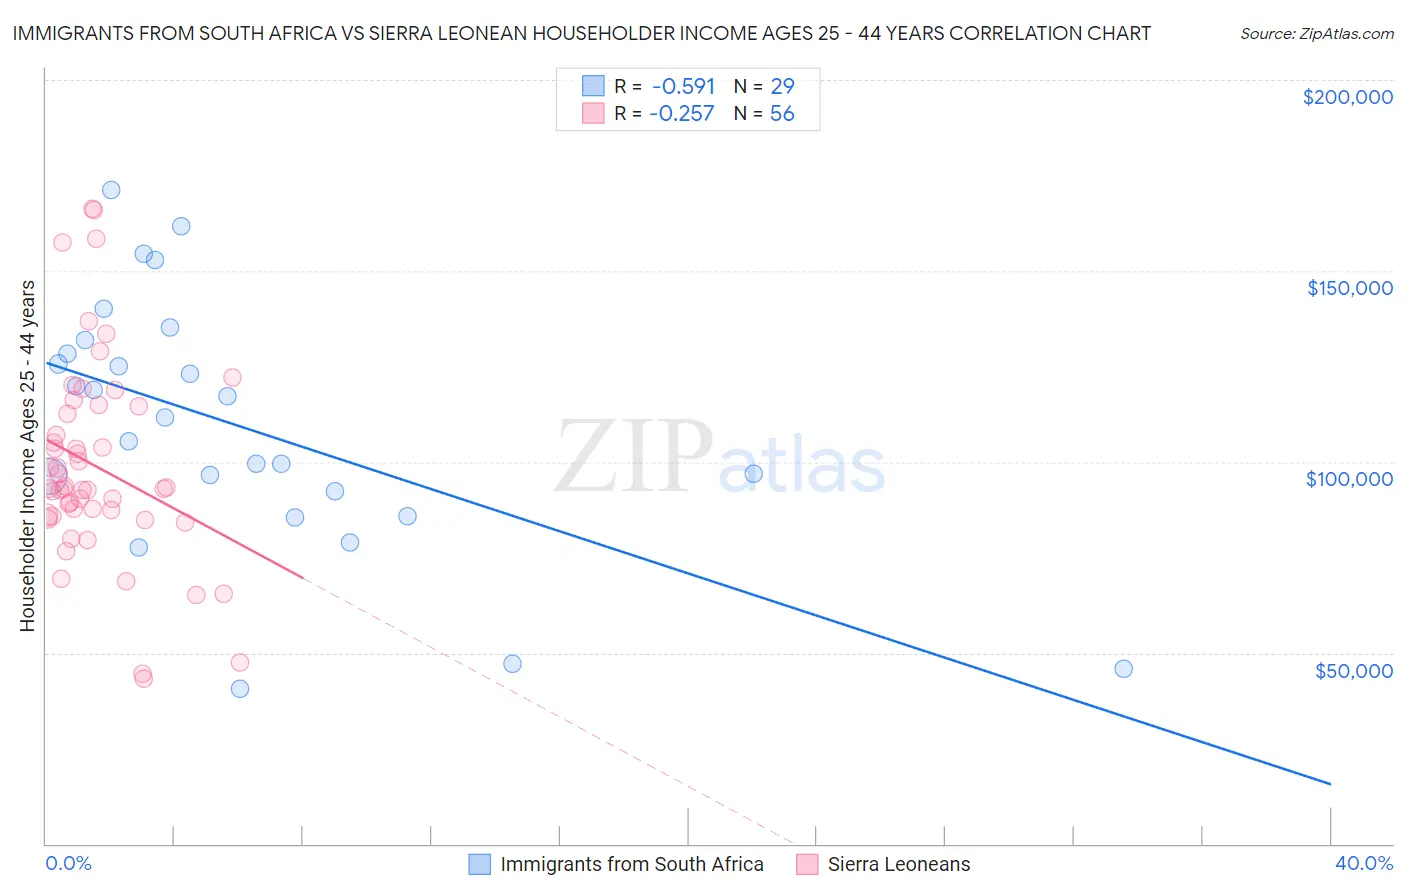 Immigrants from South Africa vs Sierra Leonean Householder Income Ages 25 - 44 years